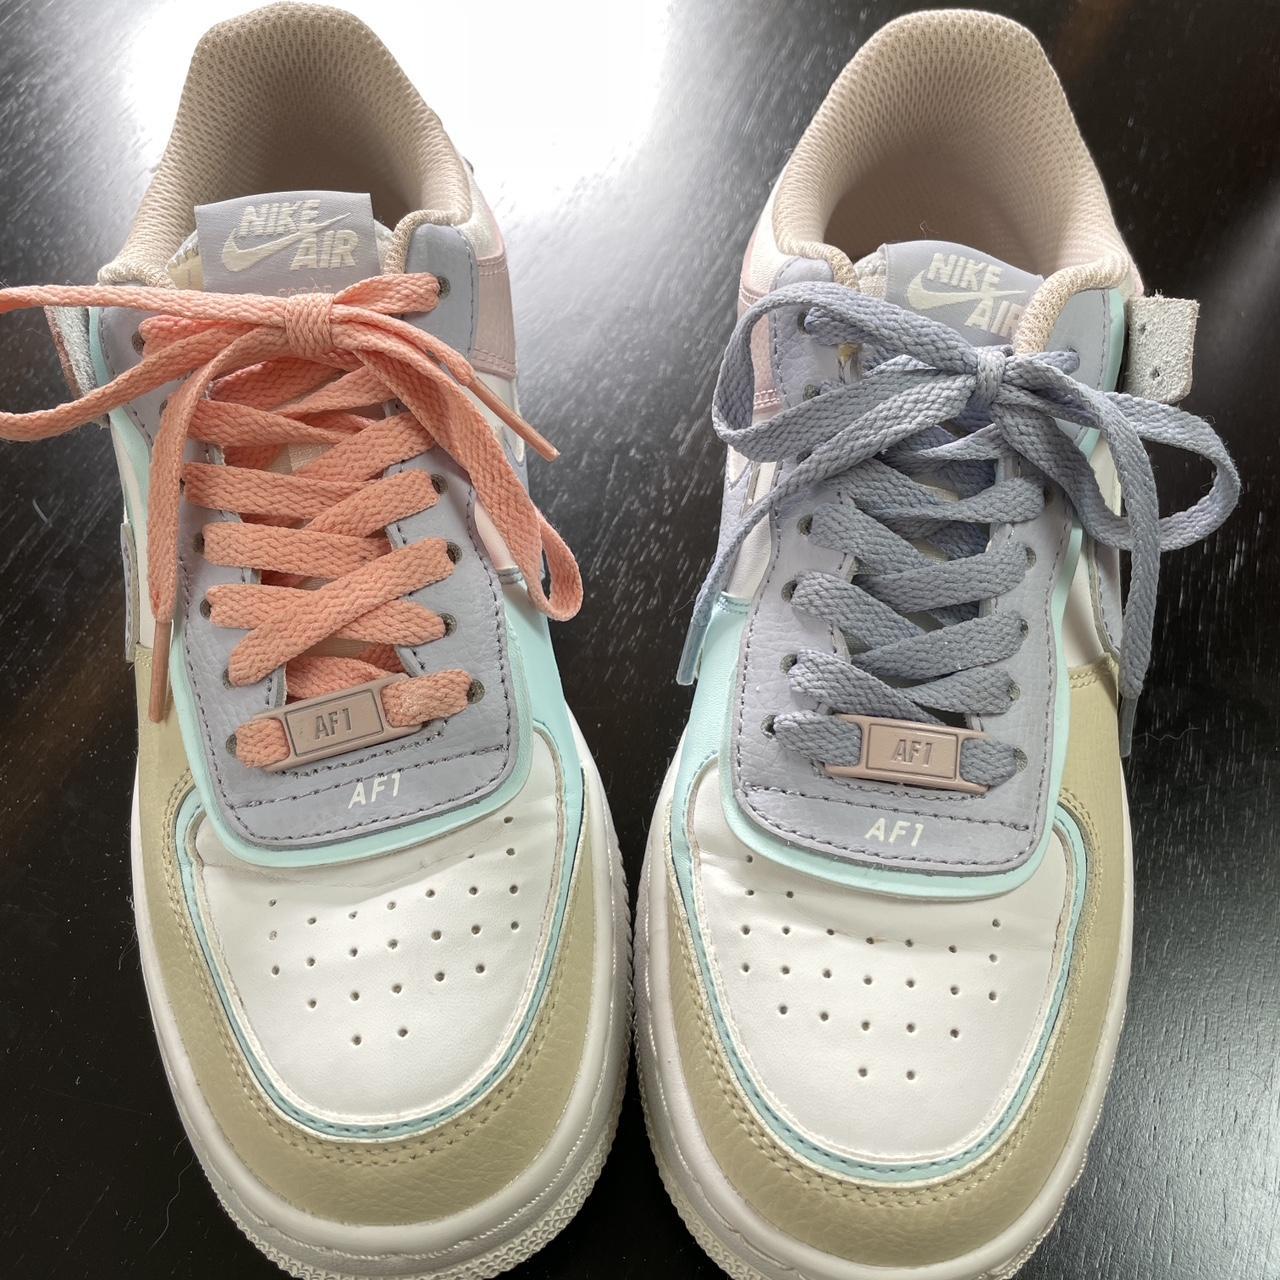 Nike Air Force 1 Shadow 'Pastel' Comes with 3 - Depop